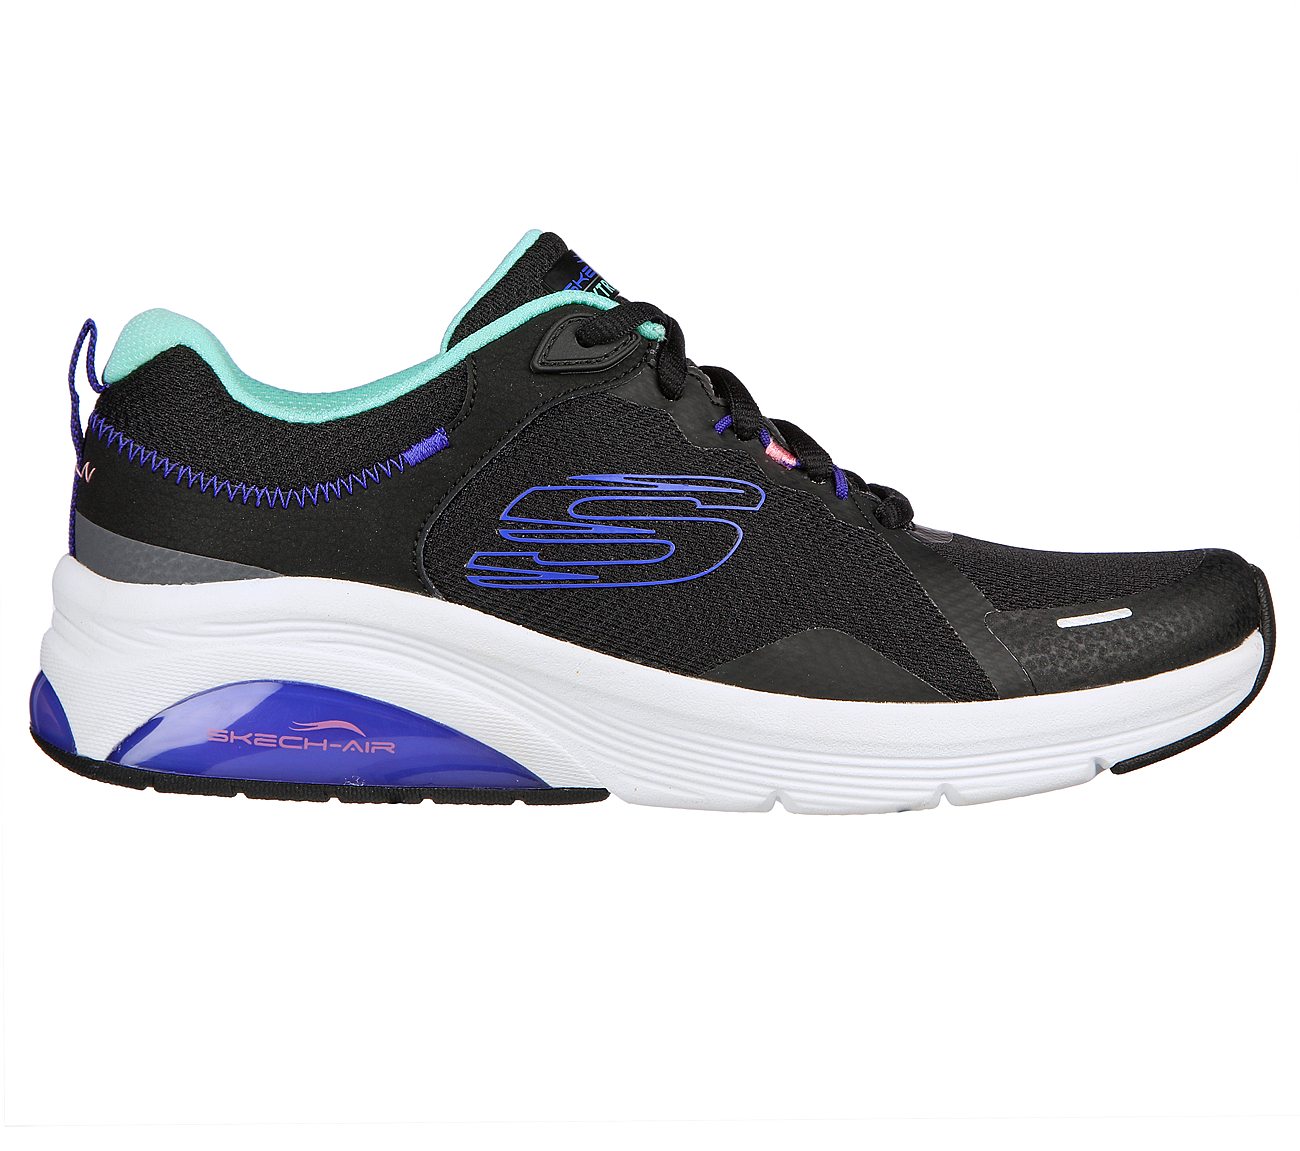 SKECH-AIR EXTREME 2.0-NEW REM, BLACK/MULTI Footwear Right View